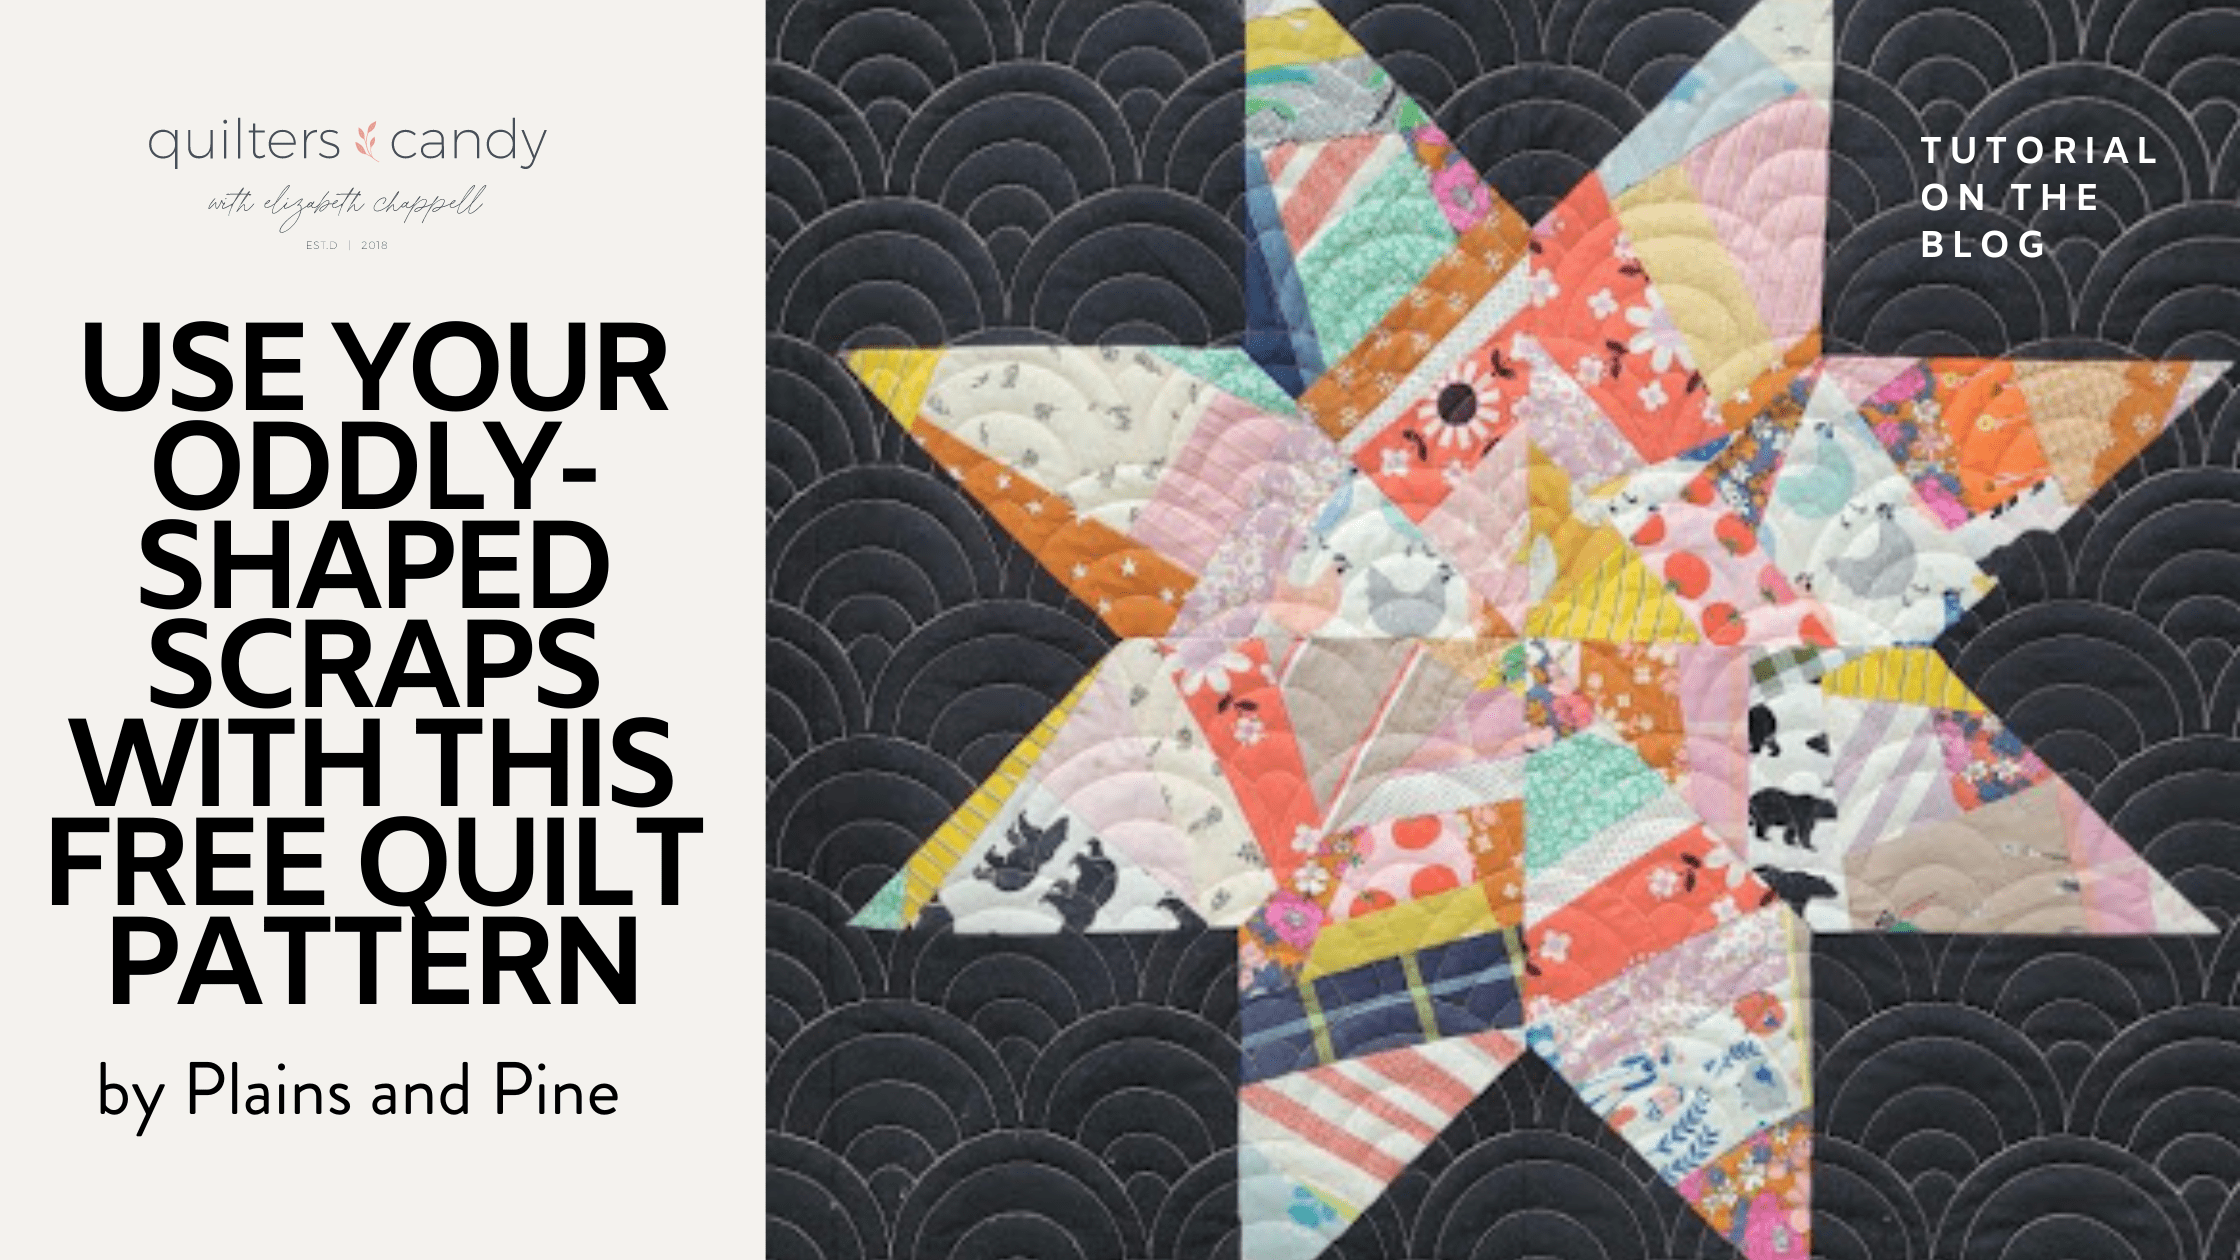 Use your Oddly-shaped Scraps with this Free Quilt Pattern by Plains and Pine